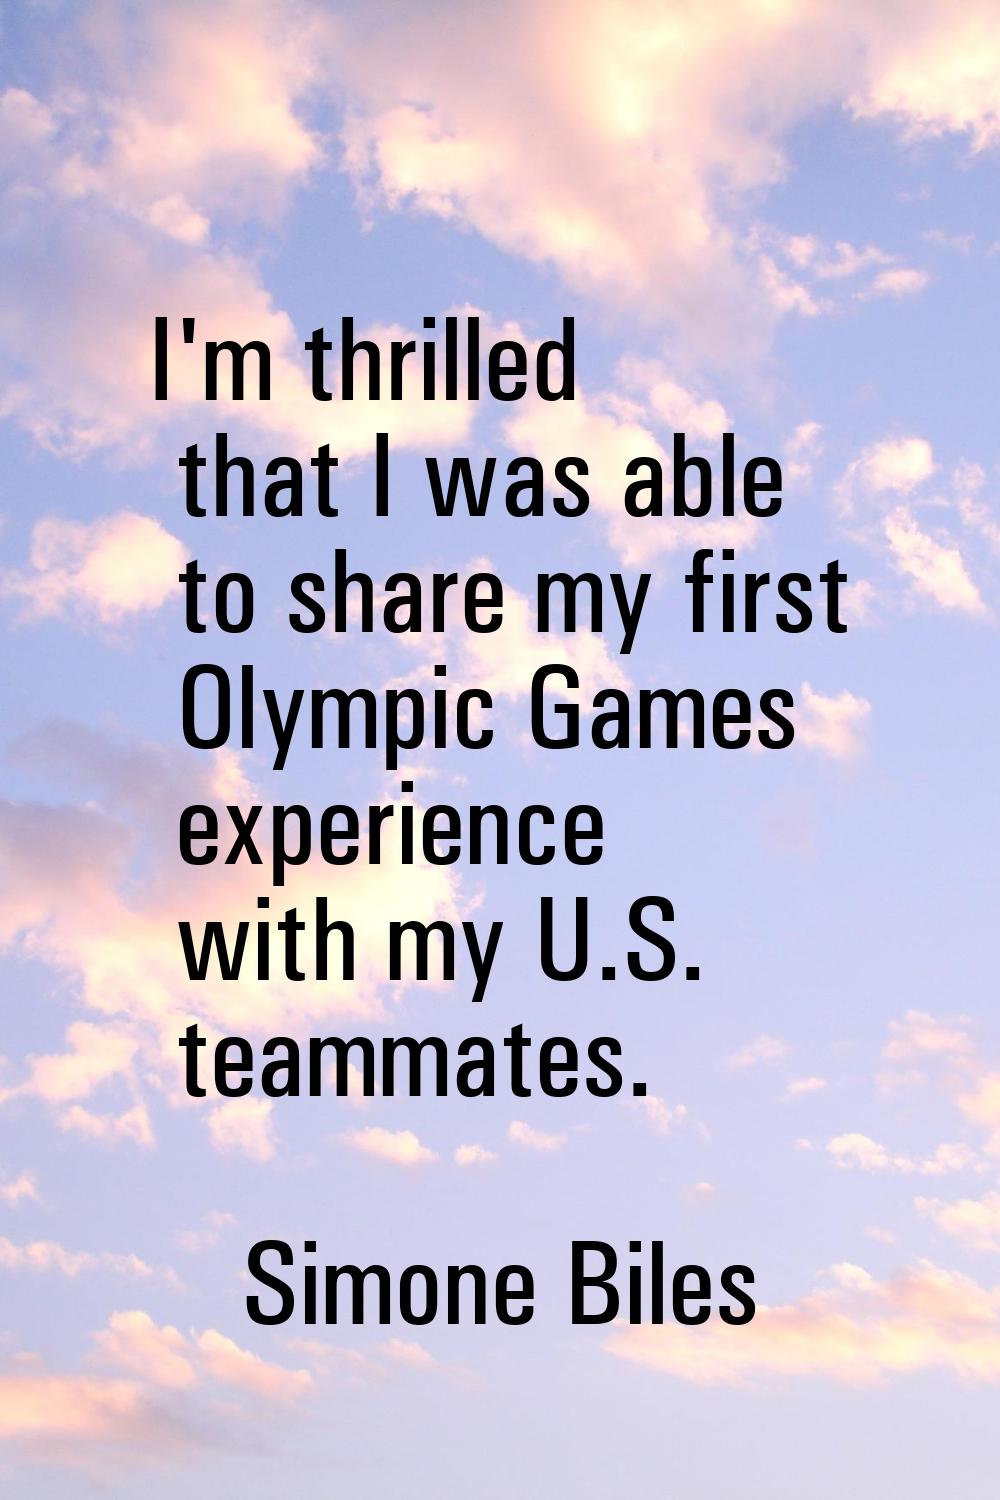 I'm thrilled that I was able to share my first Olympic Games experience with my U.S. teammates.